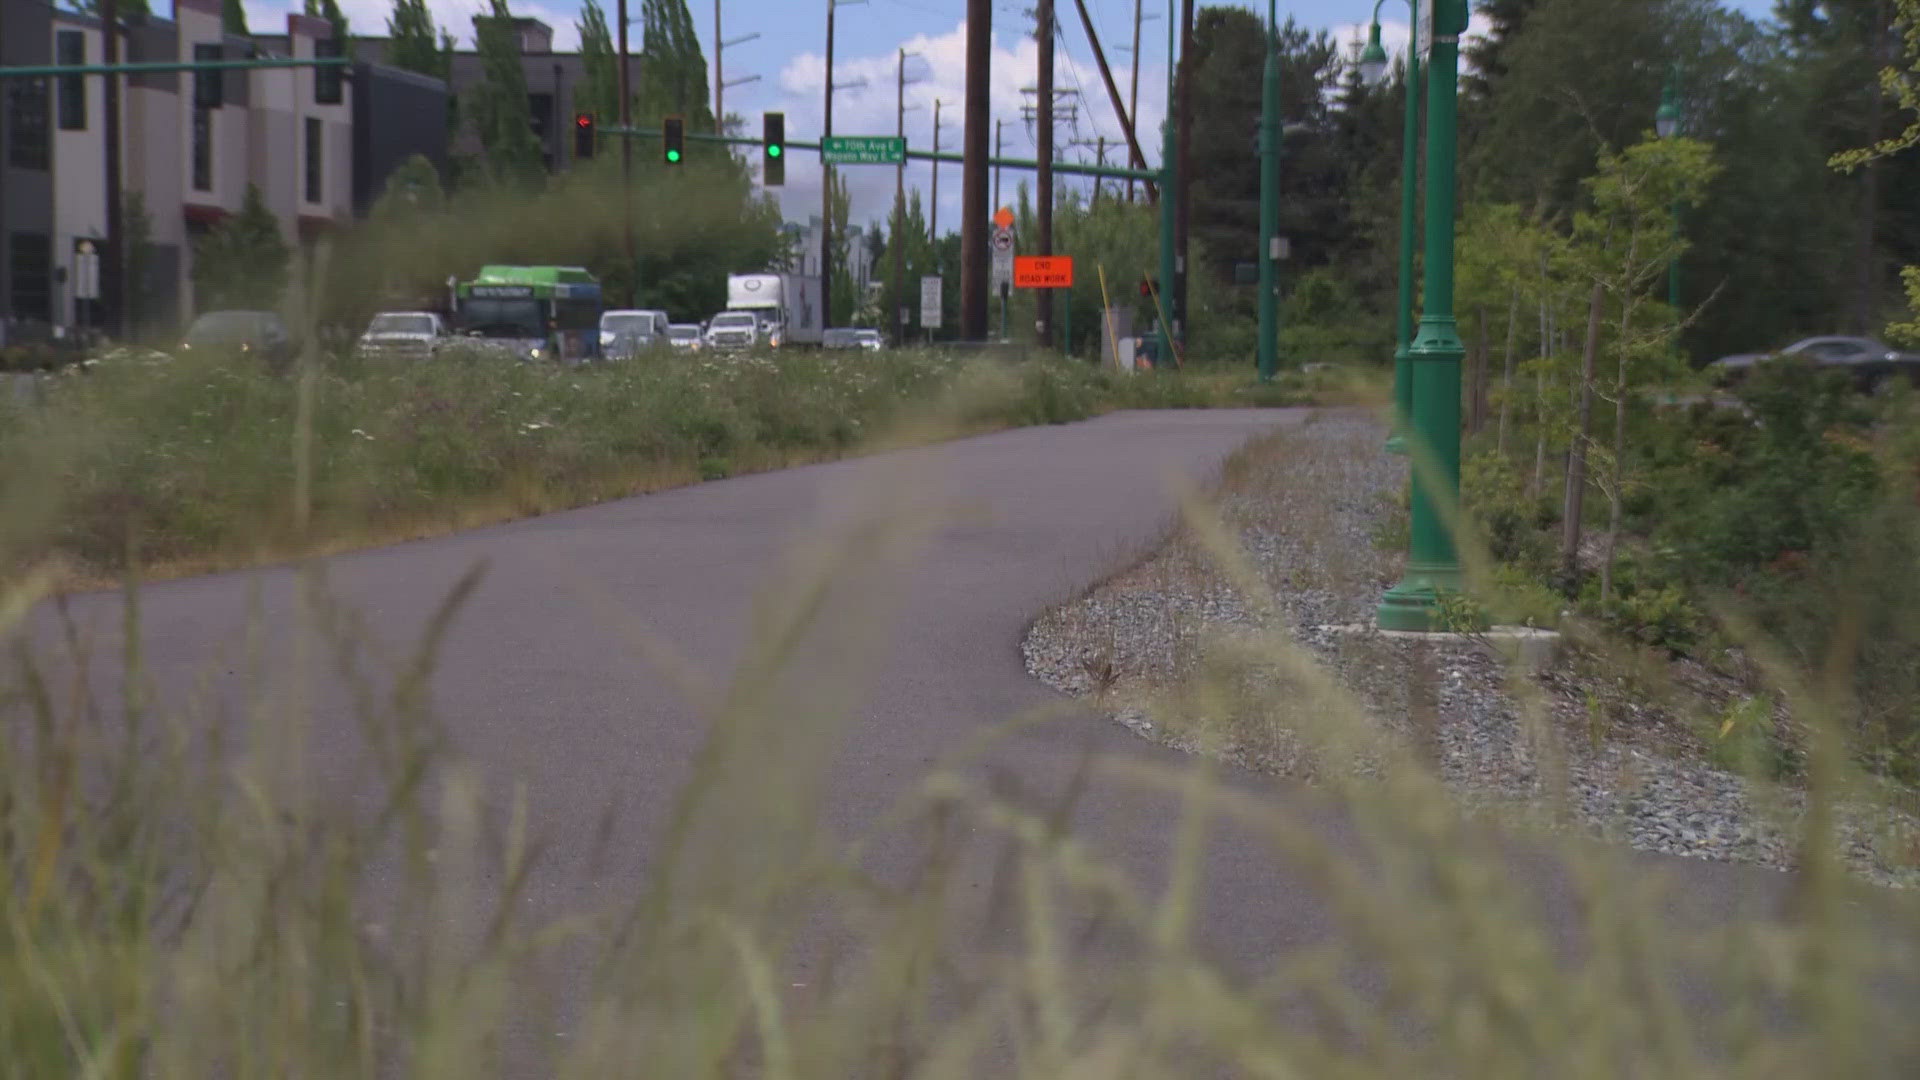 Last week WSDOT announced the name of the trail that will stretch 12 miles from Puyallup through Fife and end in downtown Tacoma.